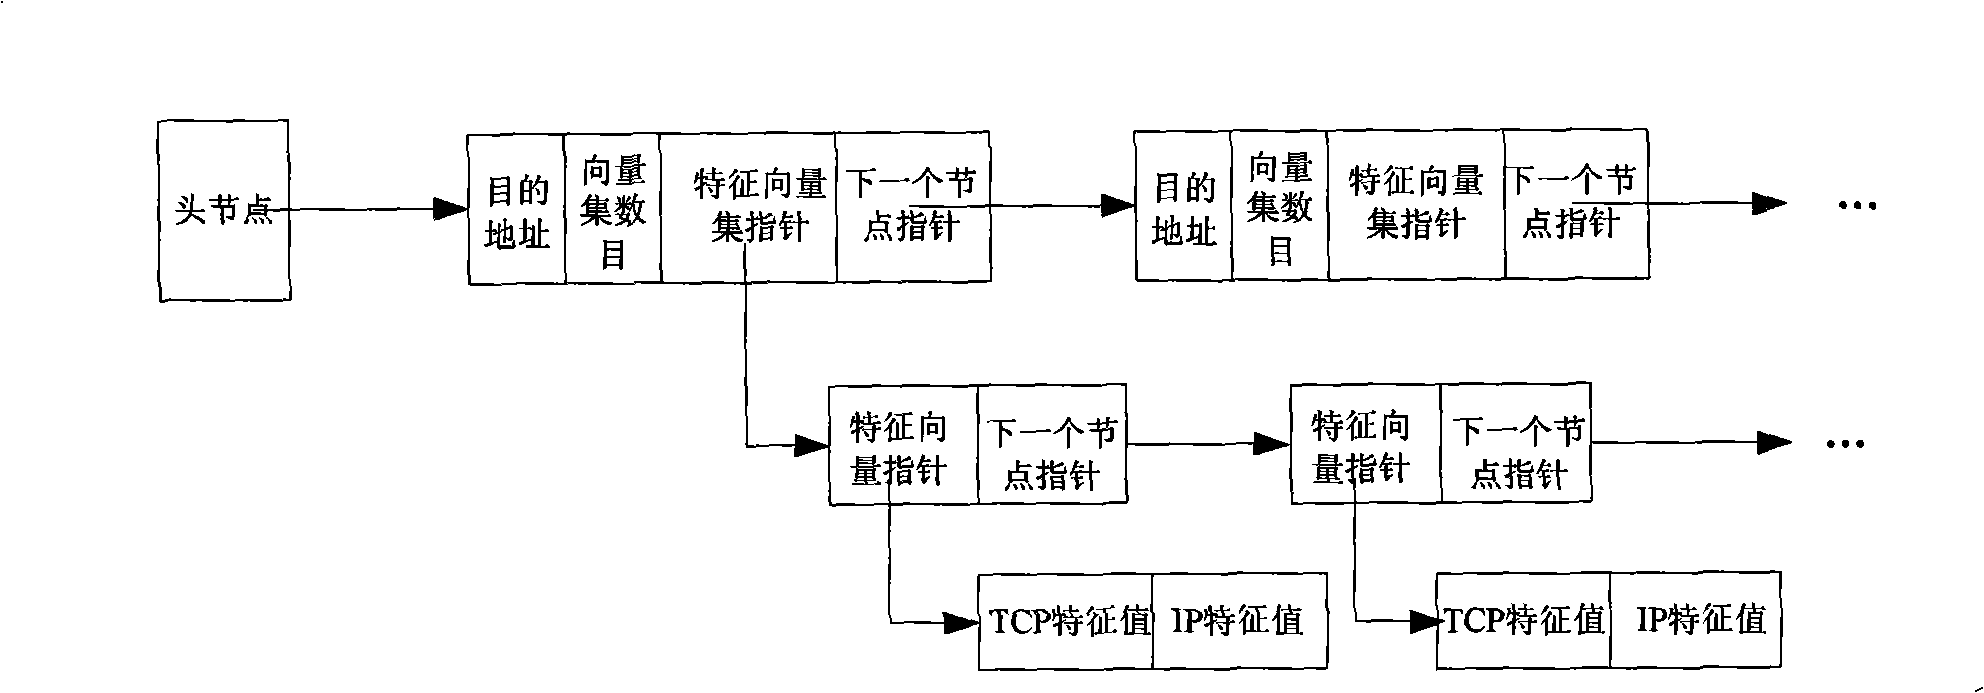 Method for detecting TCP/IP protocol concealed channel based on fuzzy neural network